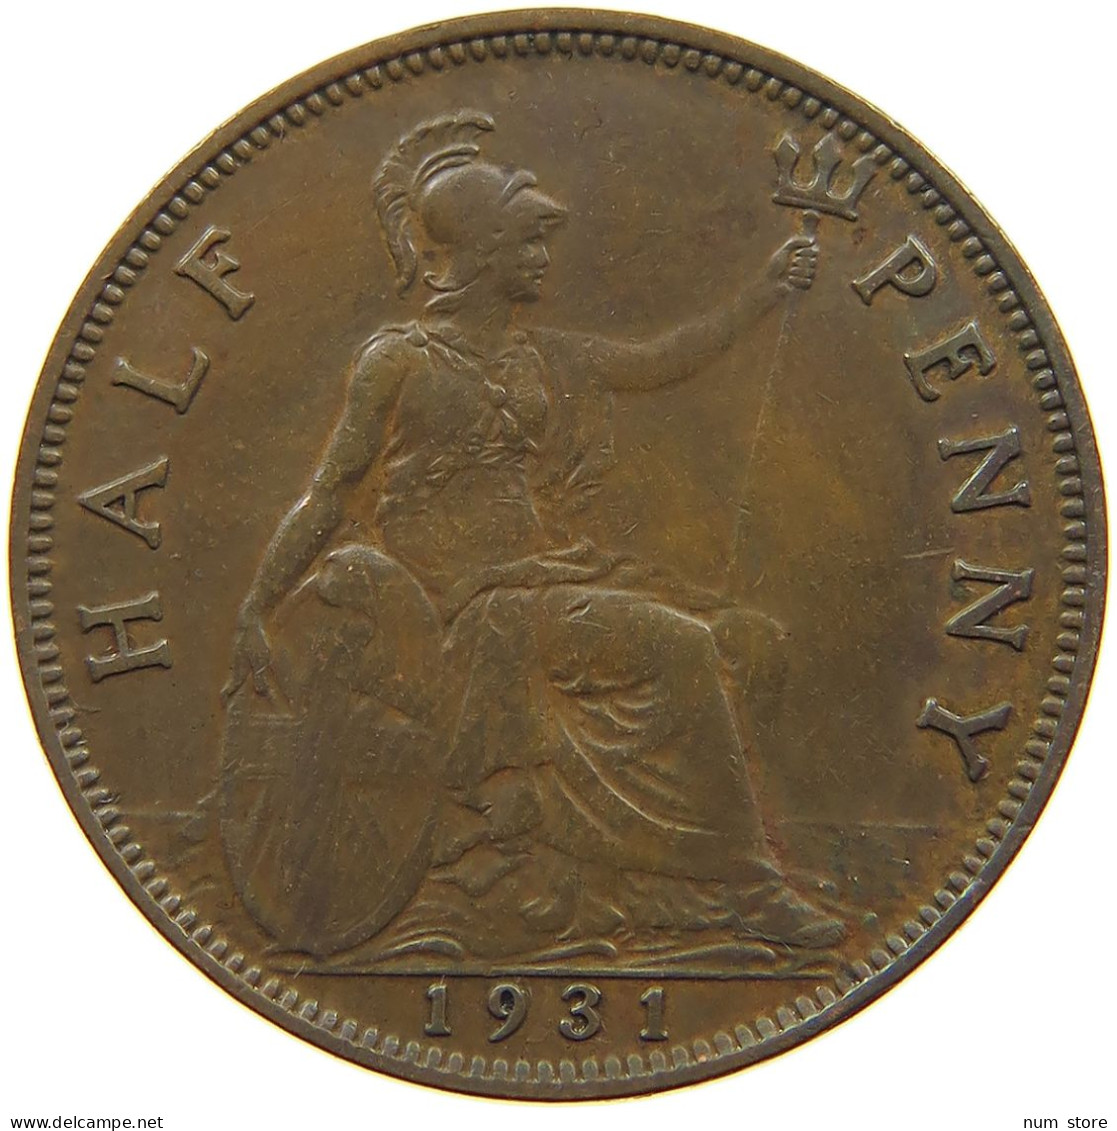 GREAT BRITAIN HALFPENNY 1931 George V. (1910-1936) #a094 0747 - C. 1/2 Penny